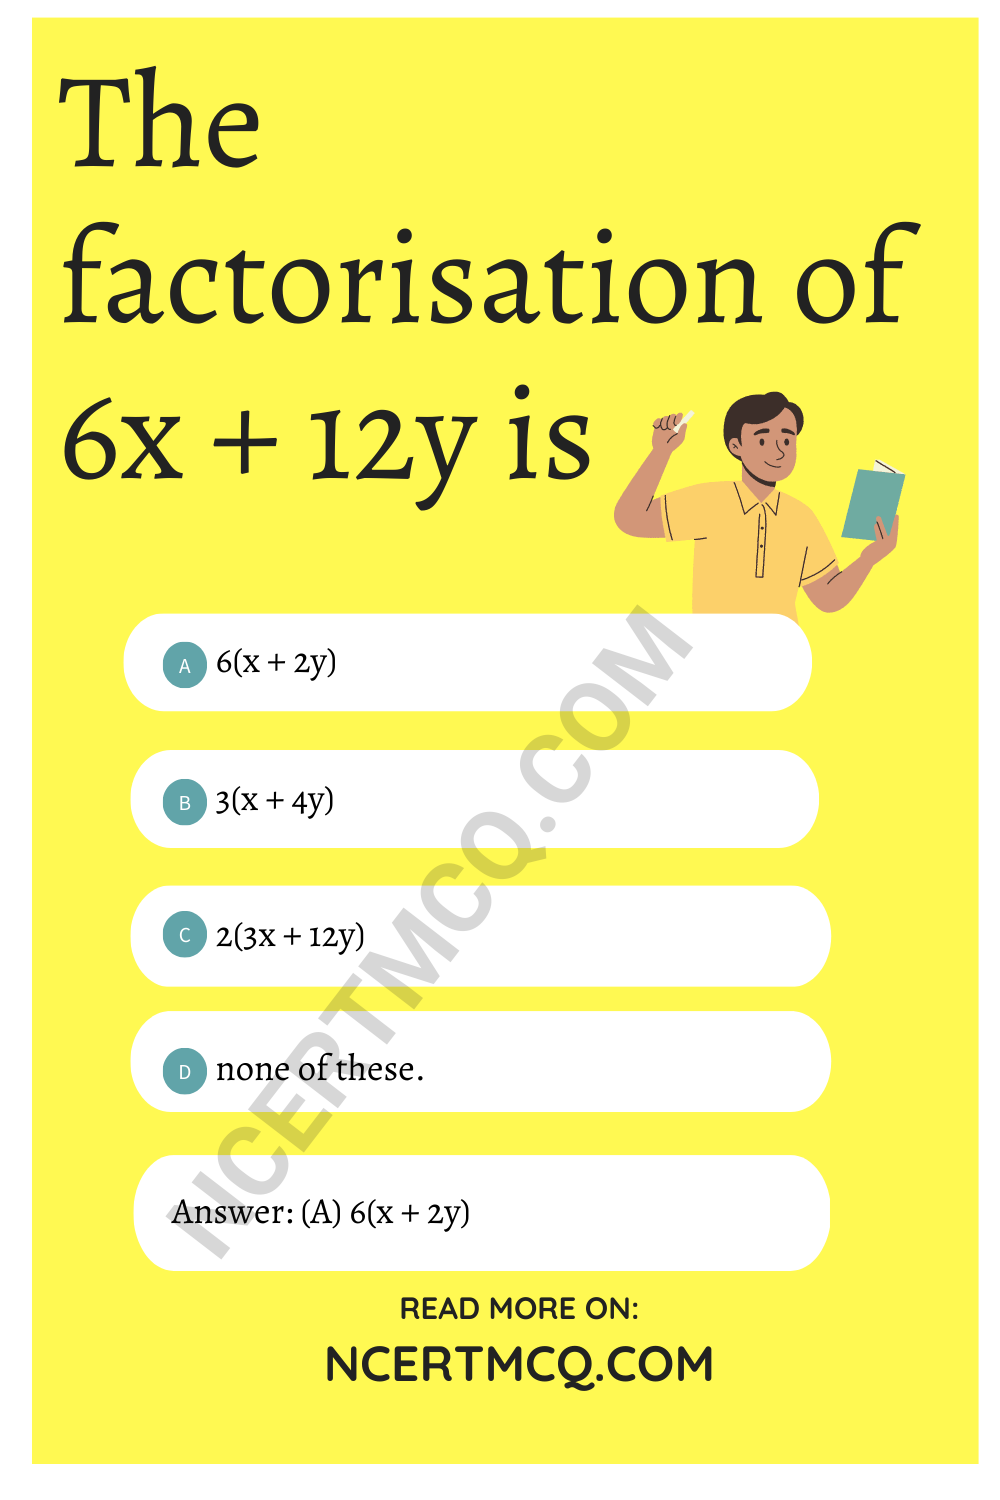 The factorisation of 6x + 12y is